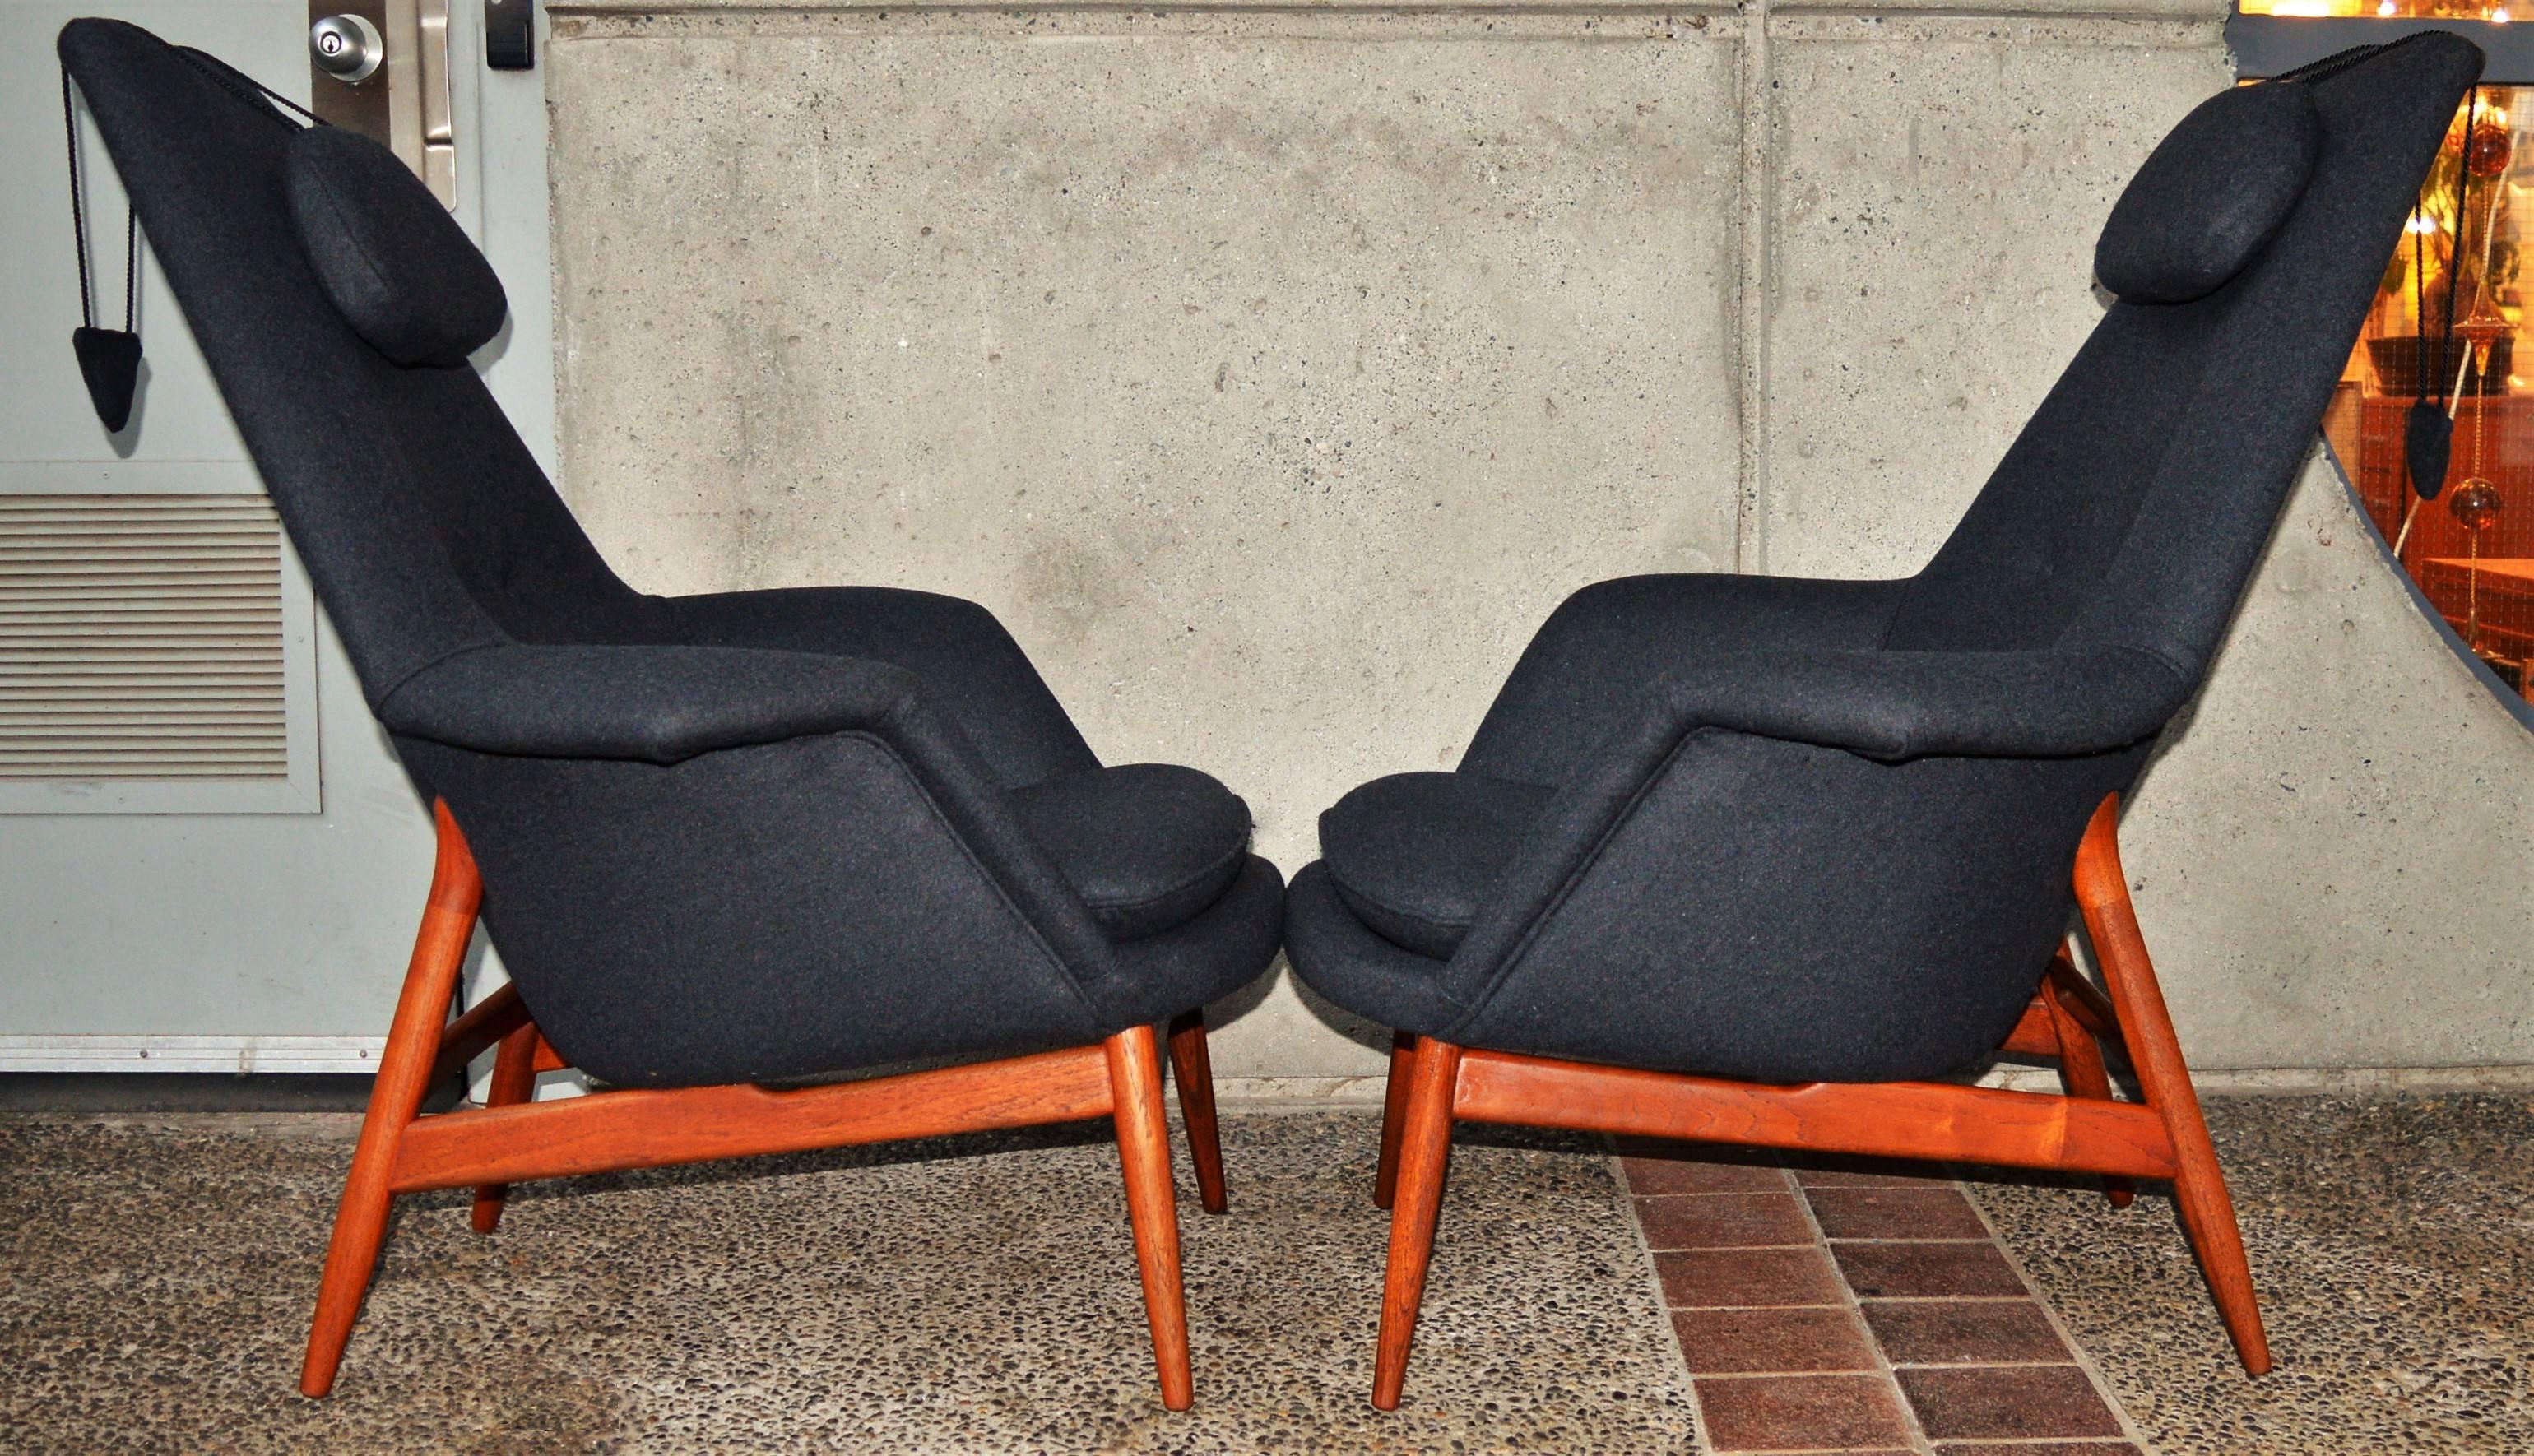 Swedish Pair of Teak Manta Ray Chairs in Charcoal Wool by Bjorn Engo for DUX